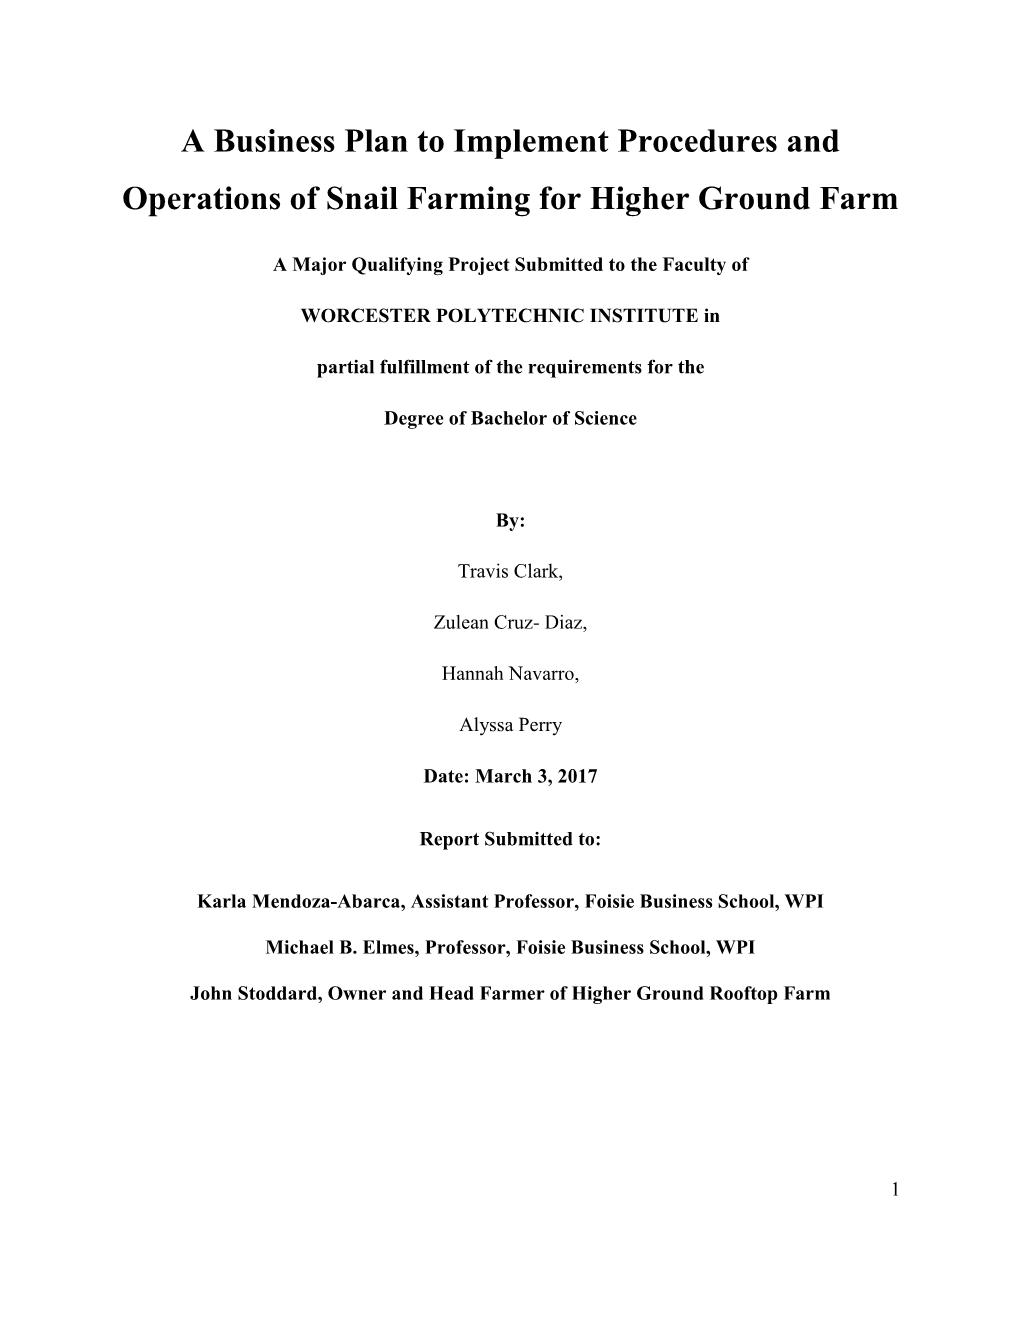 A Business Plan to Implement Procedures and Operations of Snail Farming for Higher Ground Farm